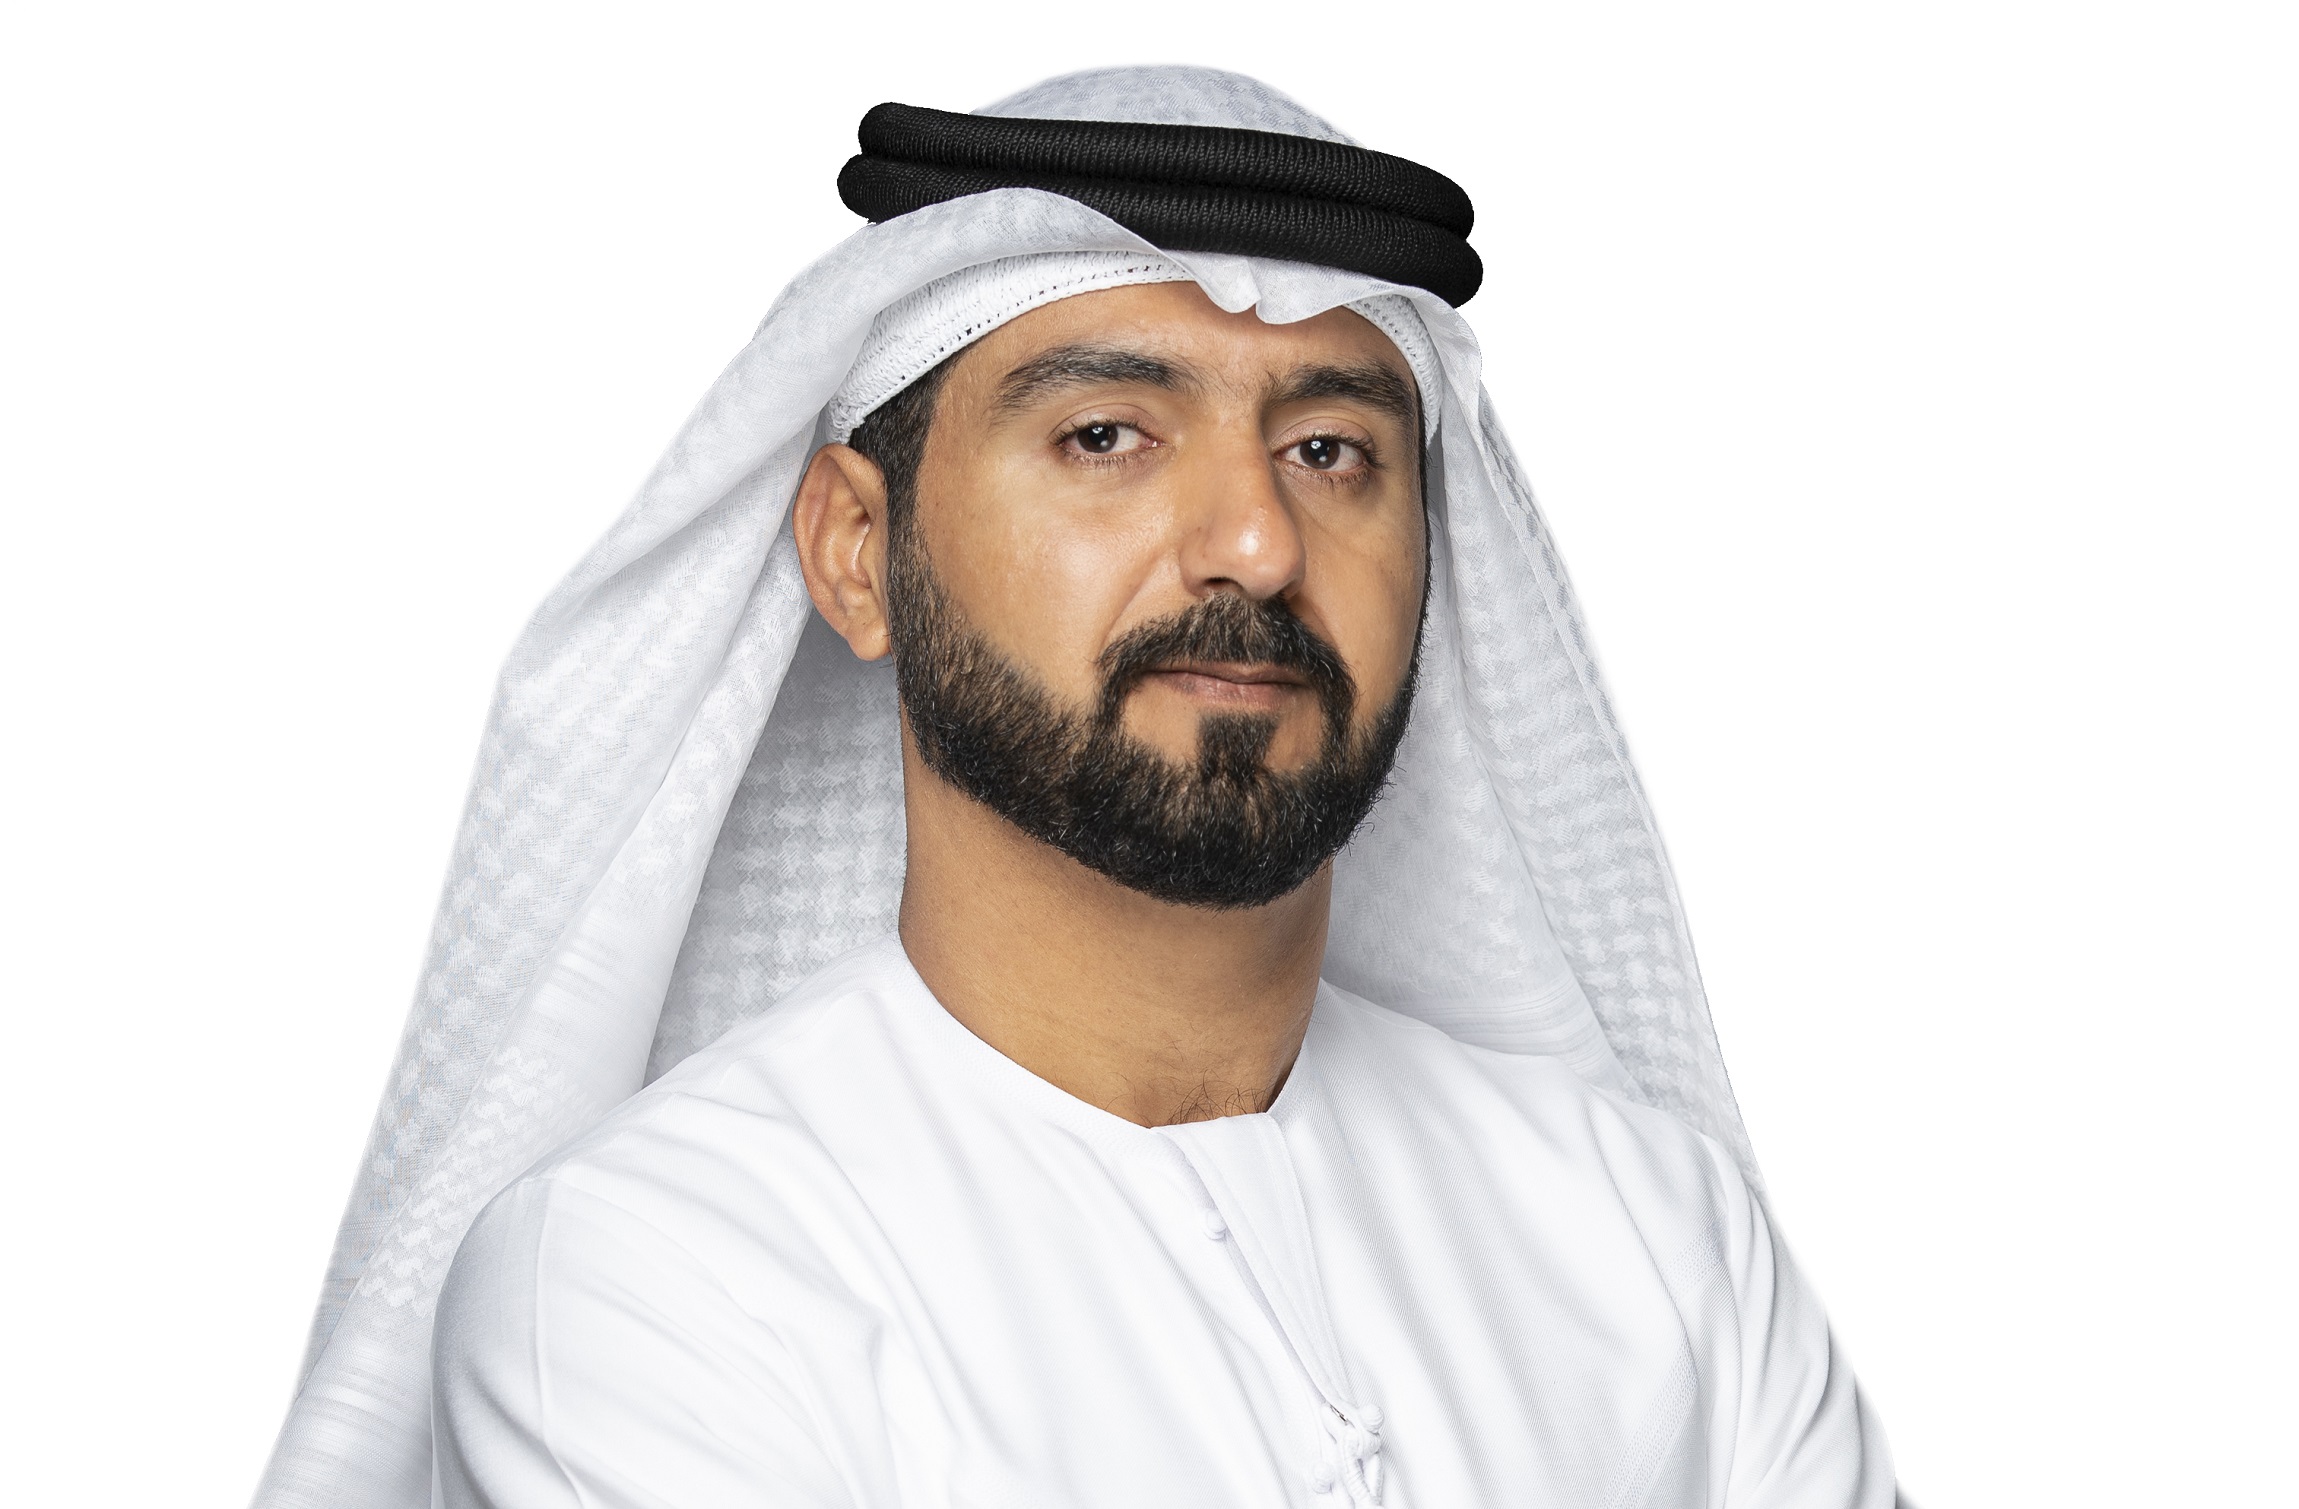 Khaled AlShehhi: “Our Ambition Is to Inspire People at Home and Abroad”